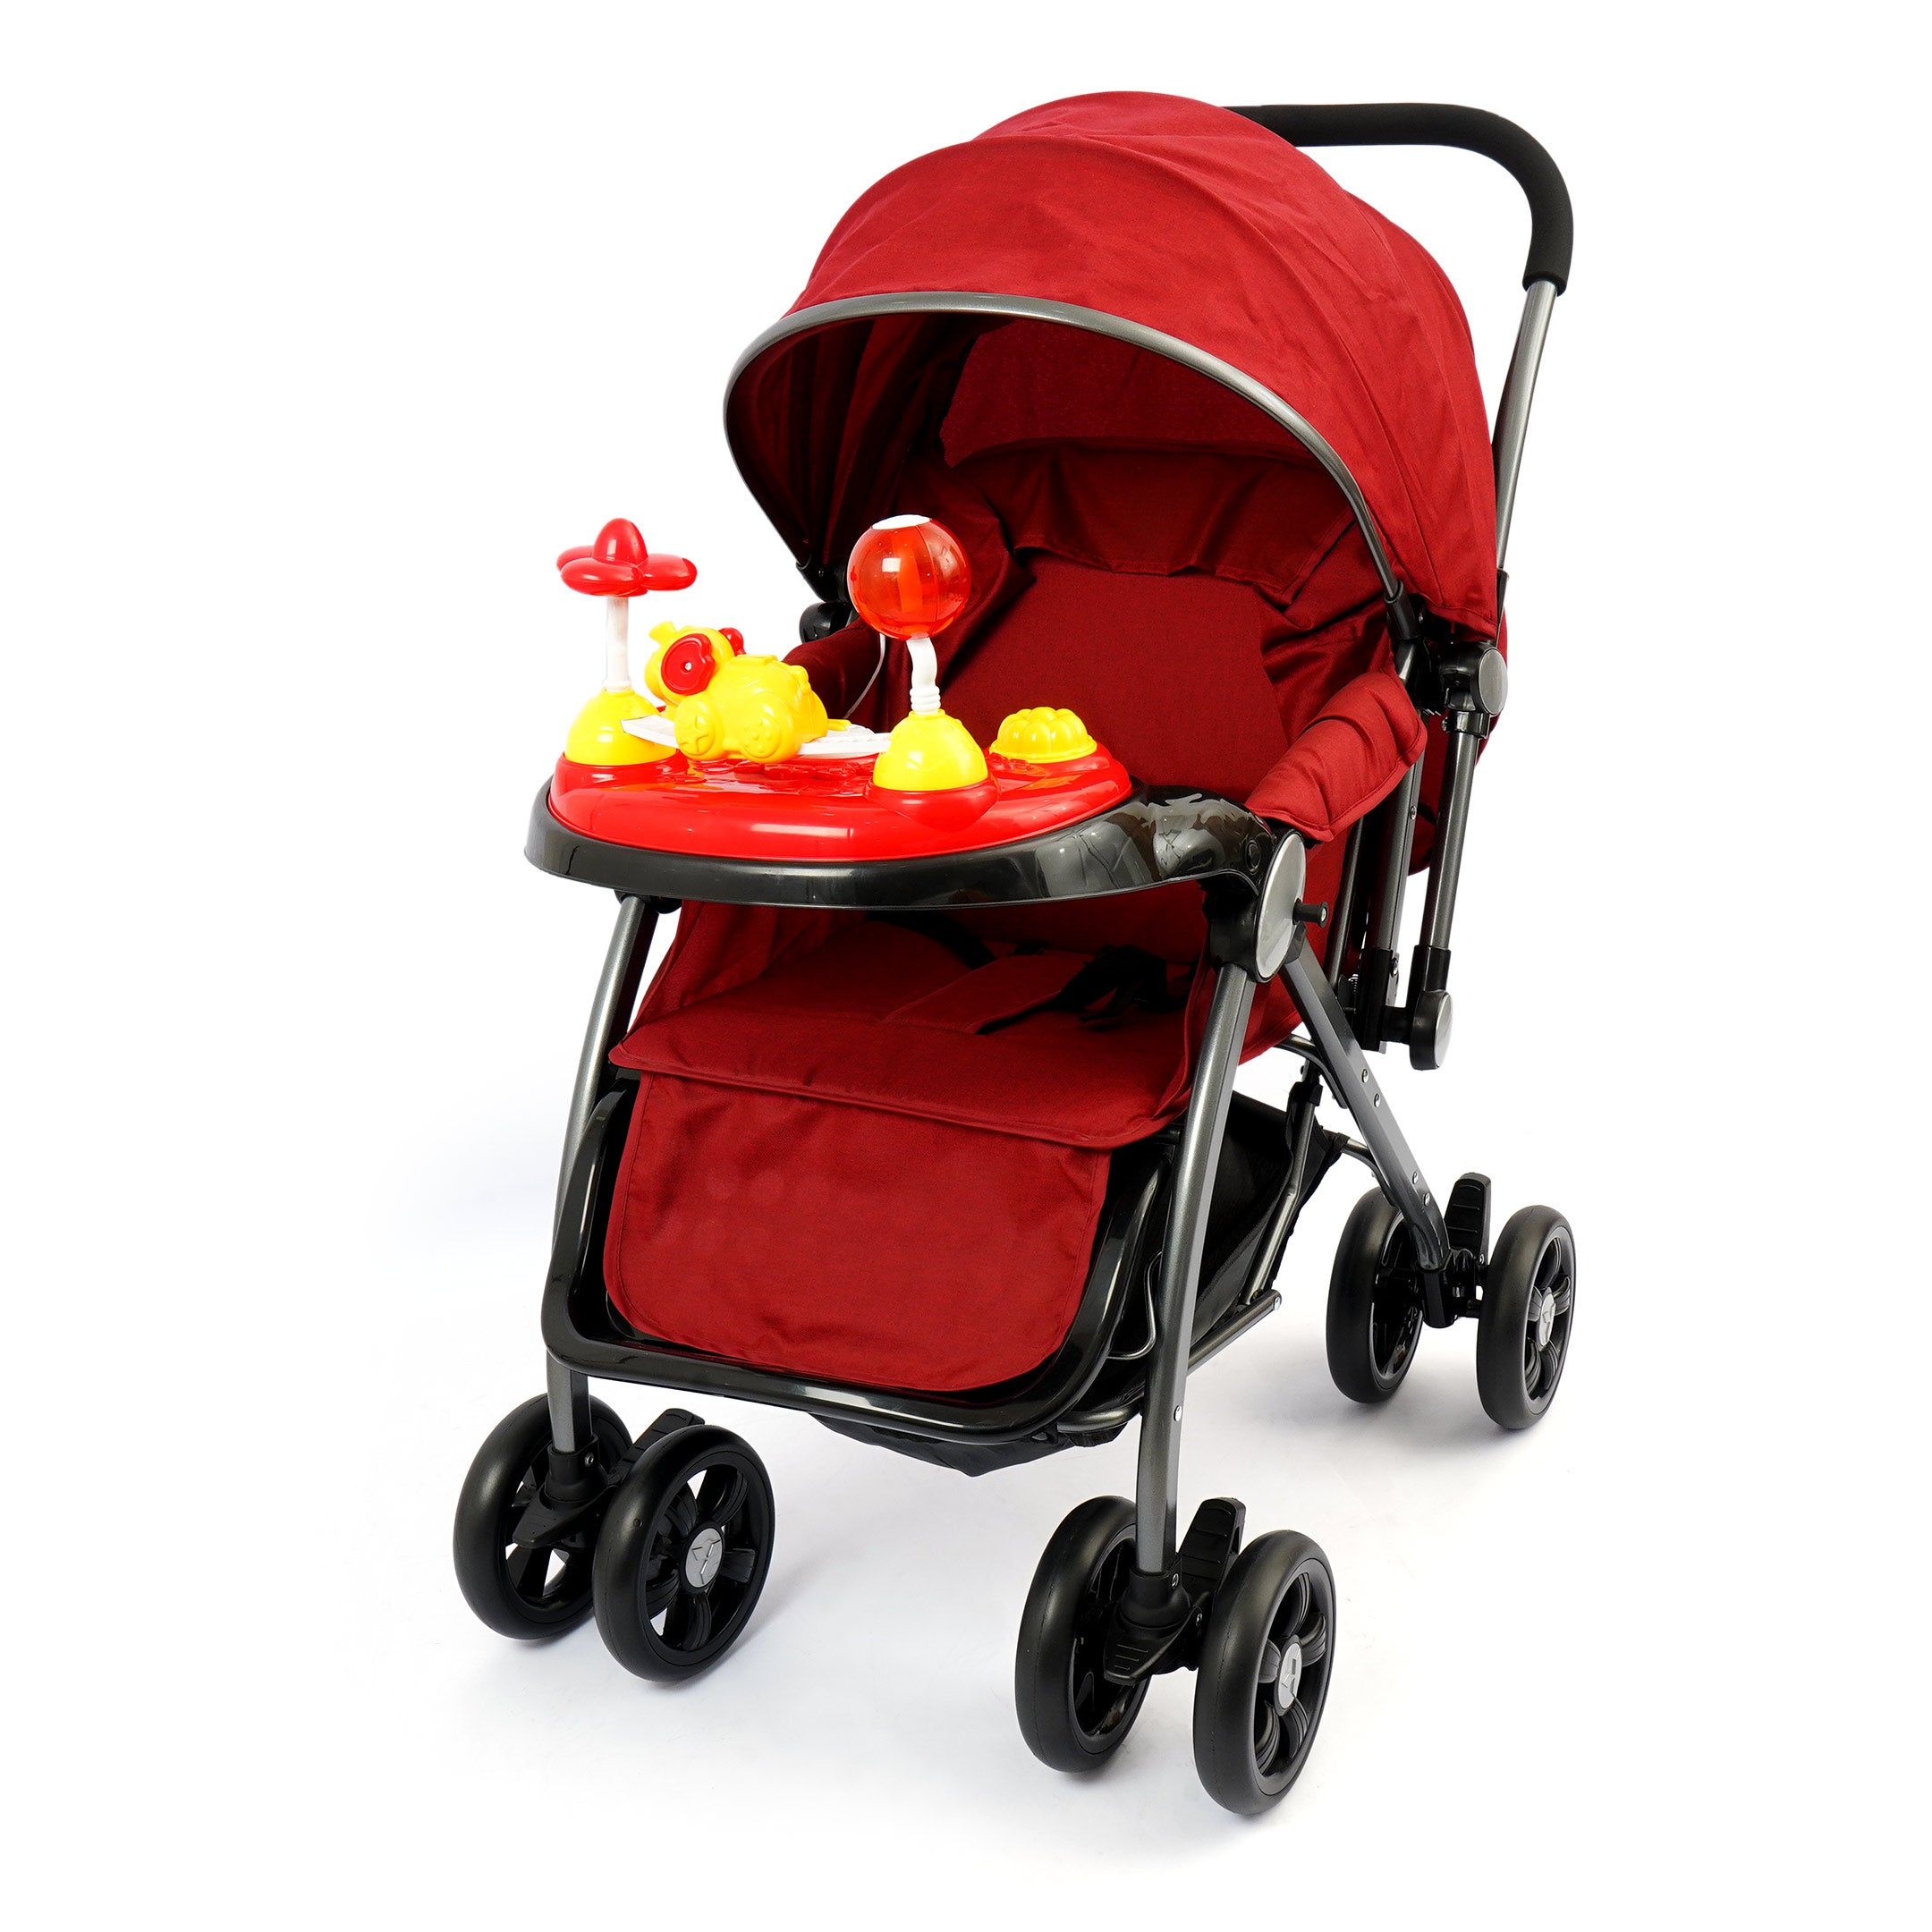 Wanbloo Baby Stroller - Red